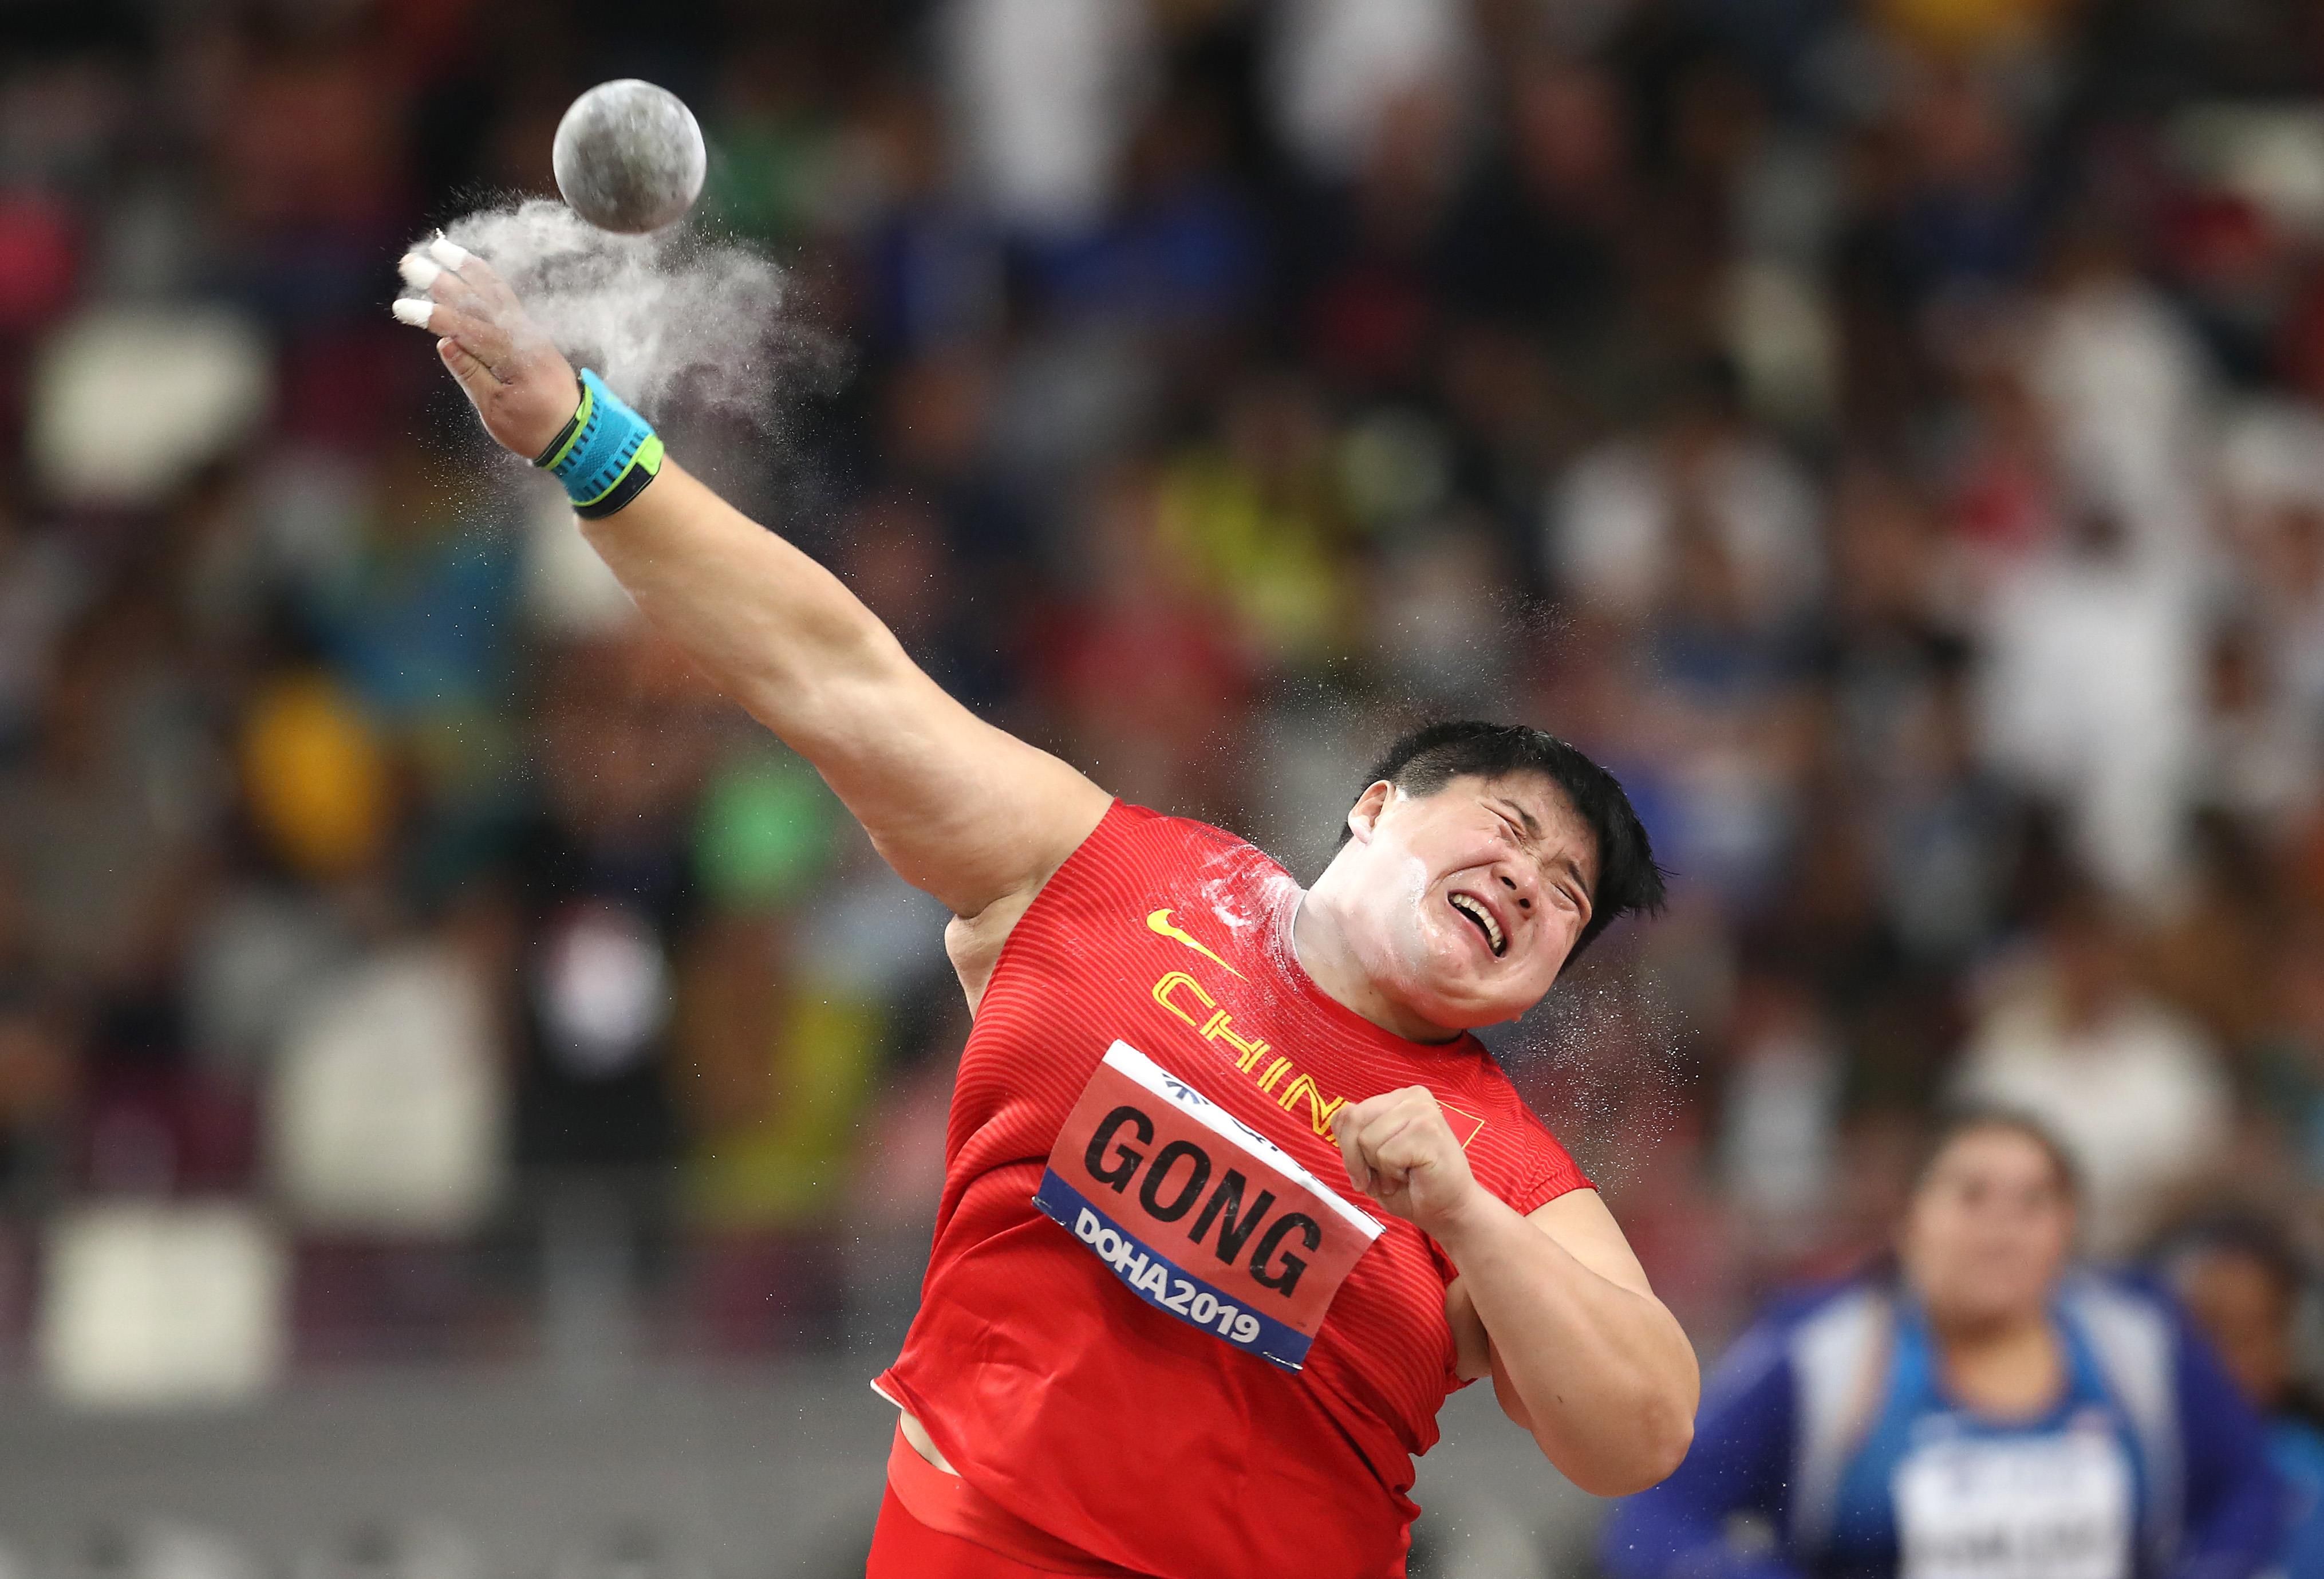 Gong Lijiao successfully defends her shot put title at the IAAF World Athletics Championships Doha 2019